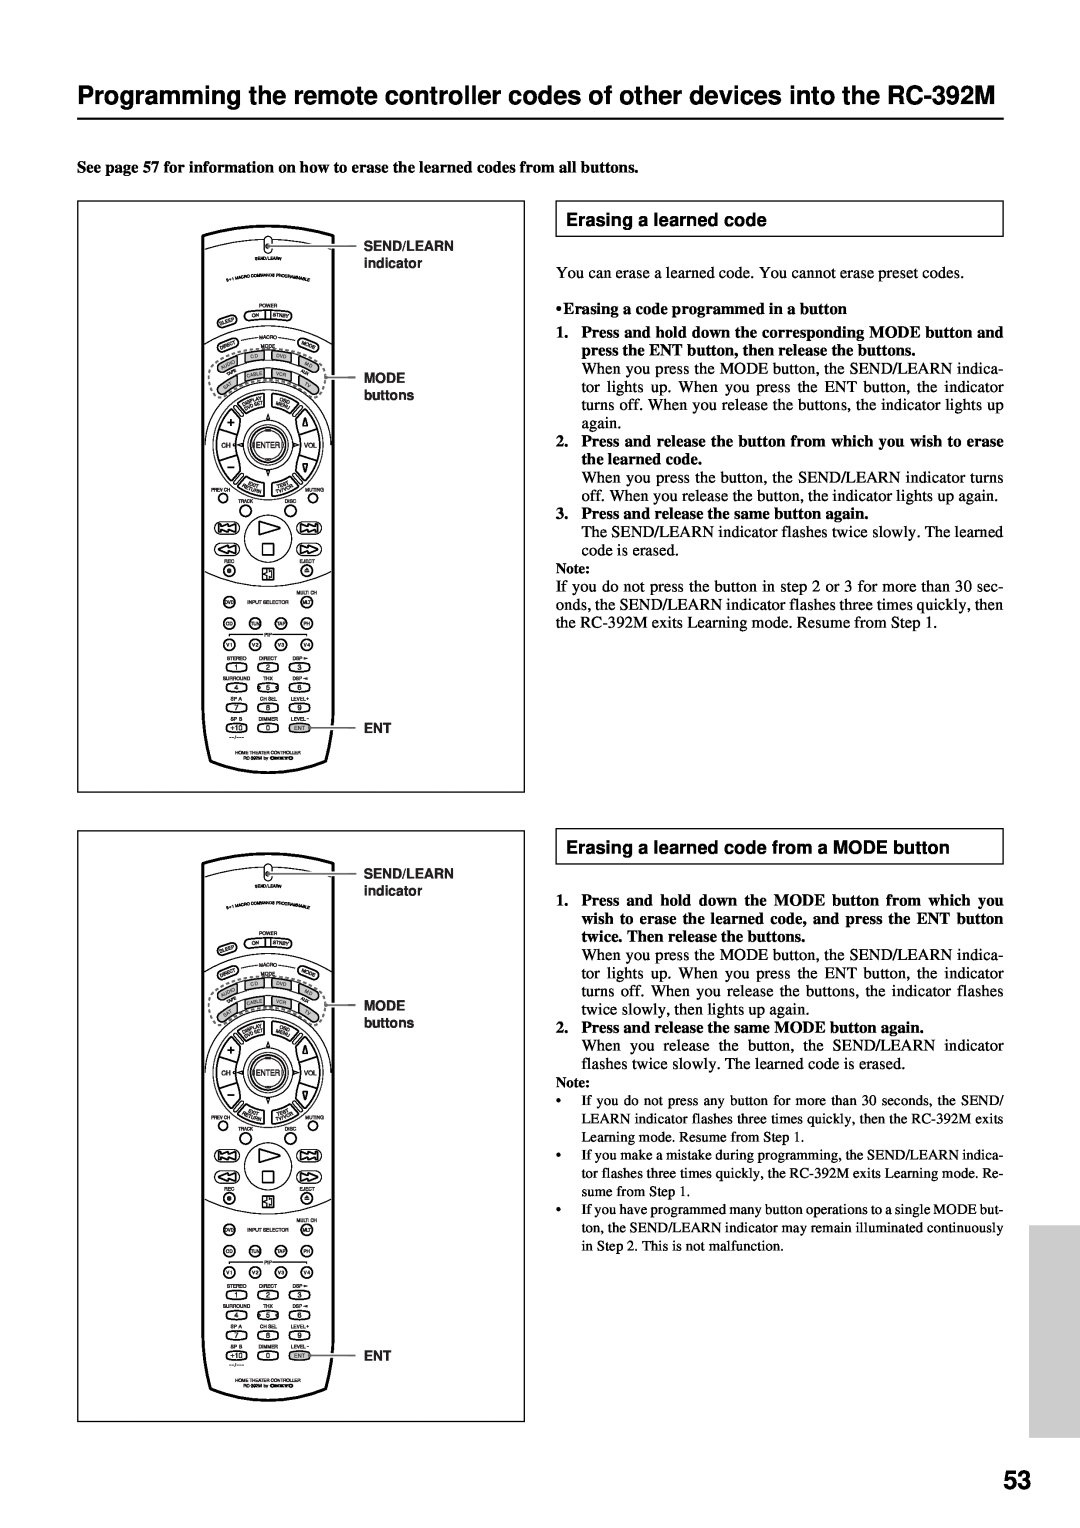 Integra DTR-7 instruction manual Erasing a learned code from a MODE button 